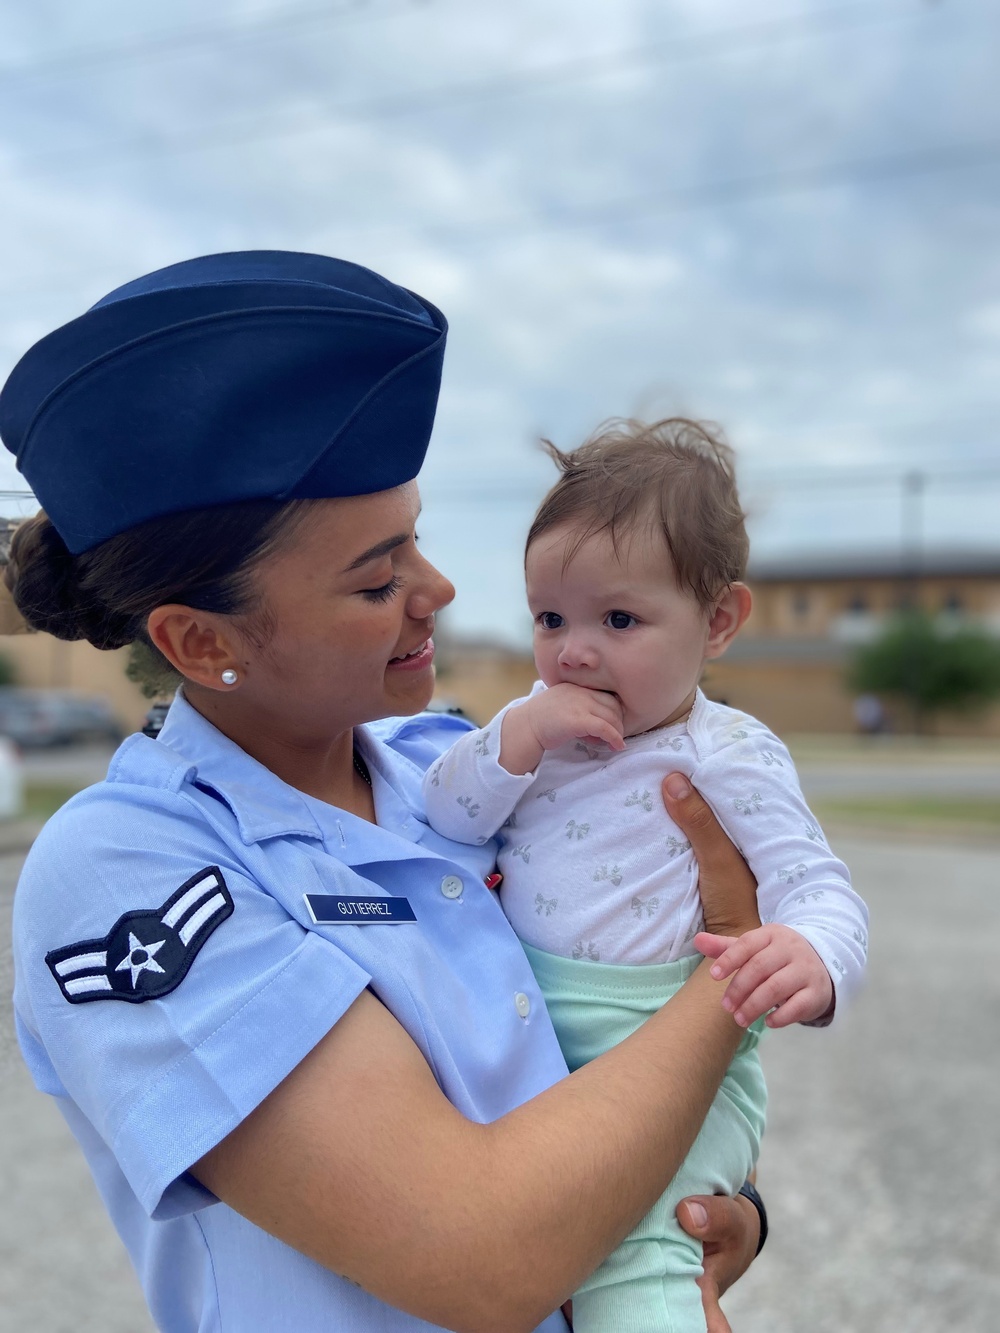 Women’s History Month: One single mother’s commitment to service